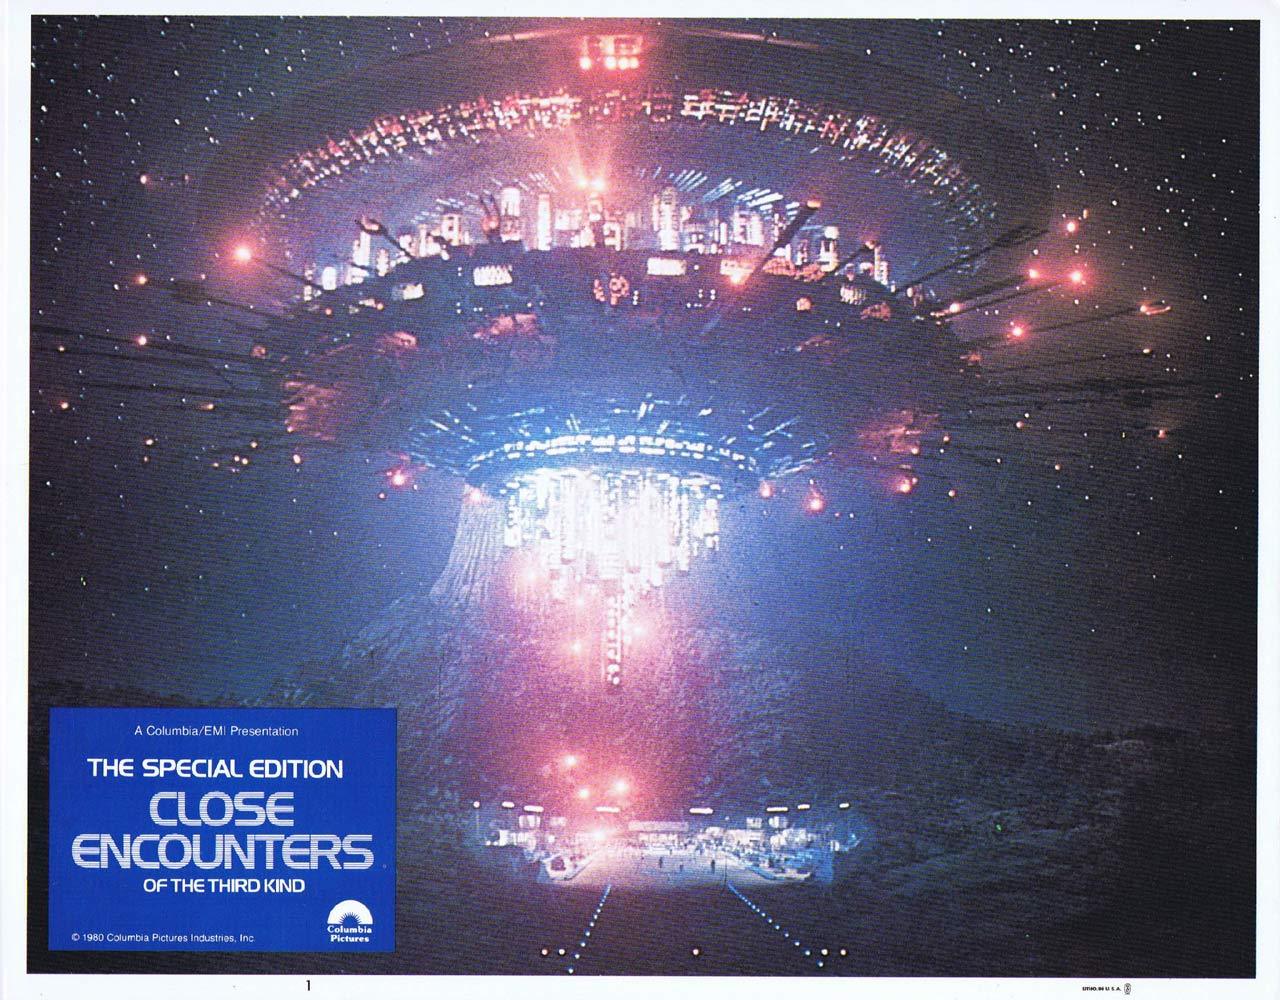 CLOSE ENCOUNTERS OF THE THIRD KIND SPECIAL EDITION Lobby card 1 Richard Dreyfuss